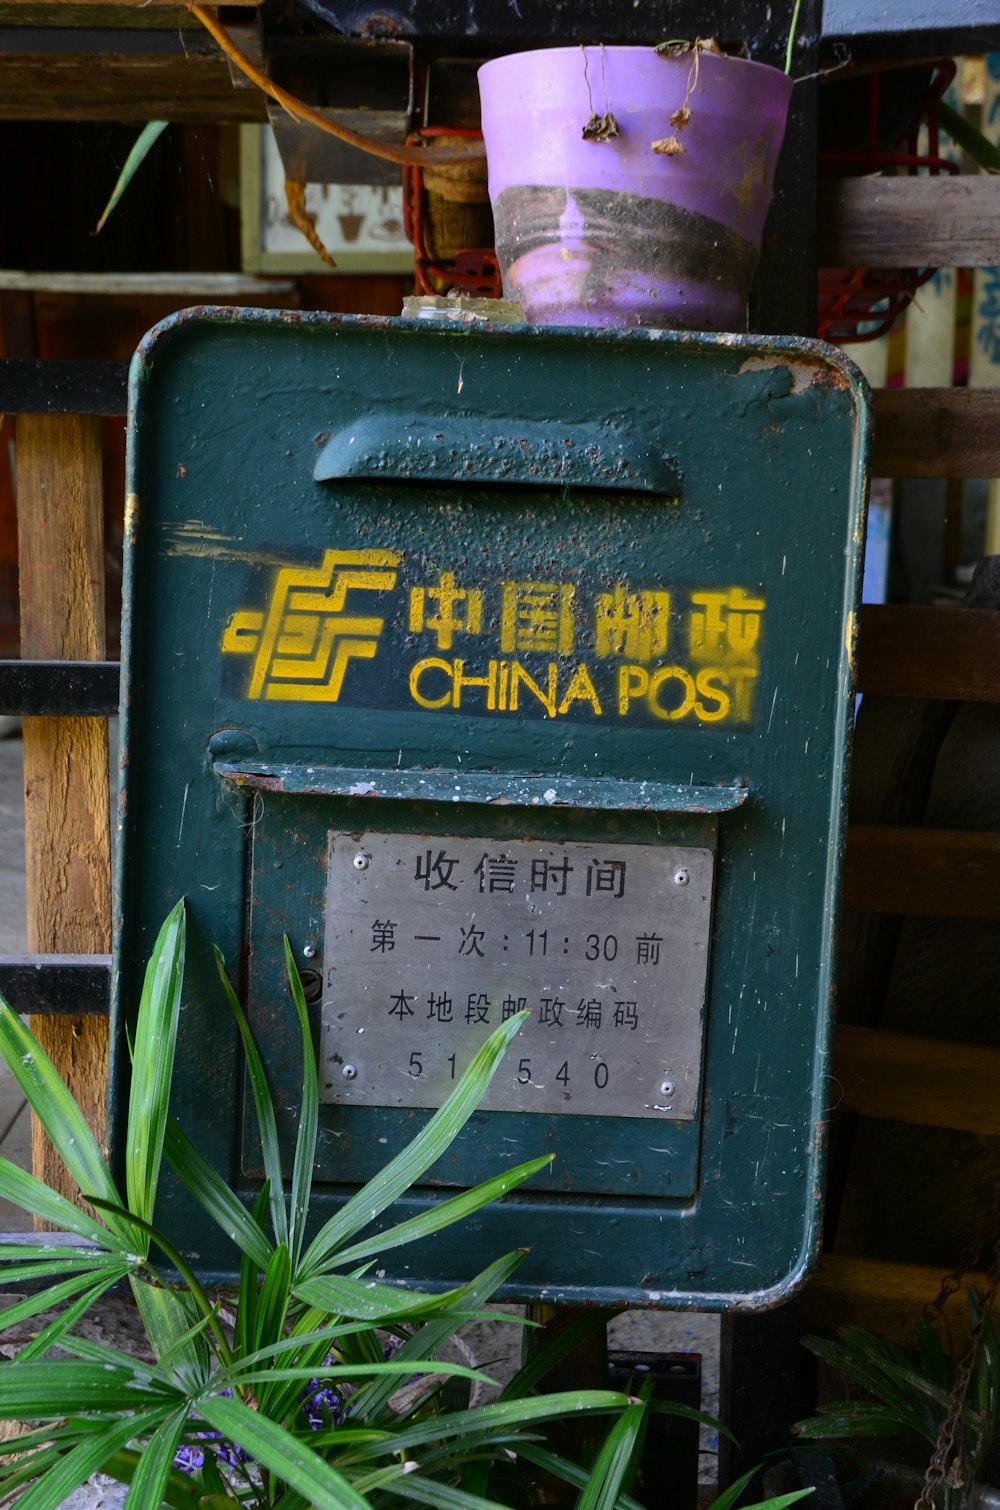 a sign that says china post in a foreign language